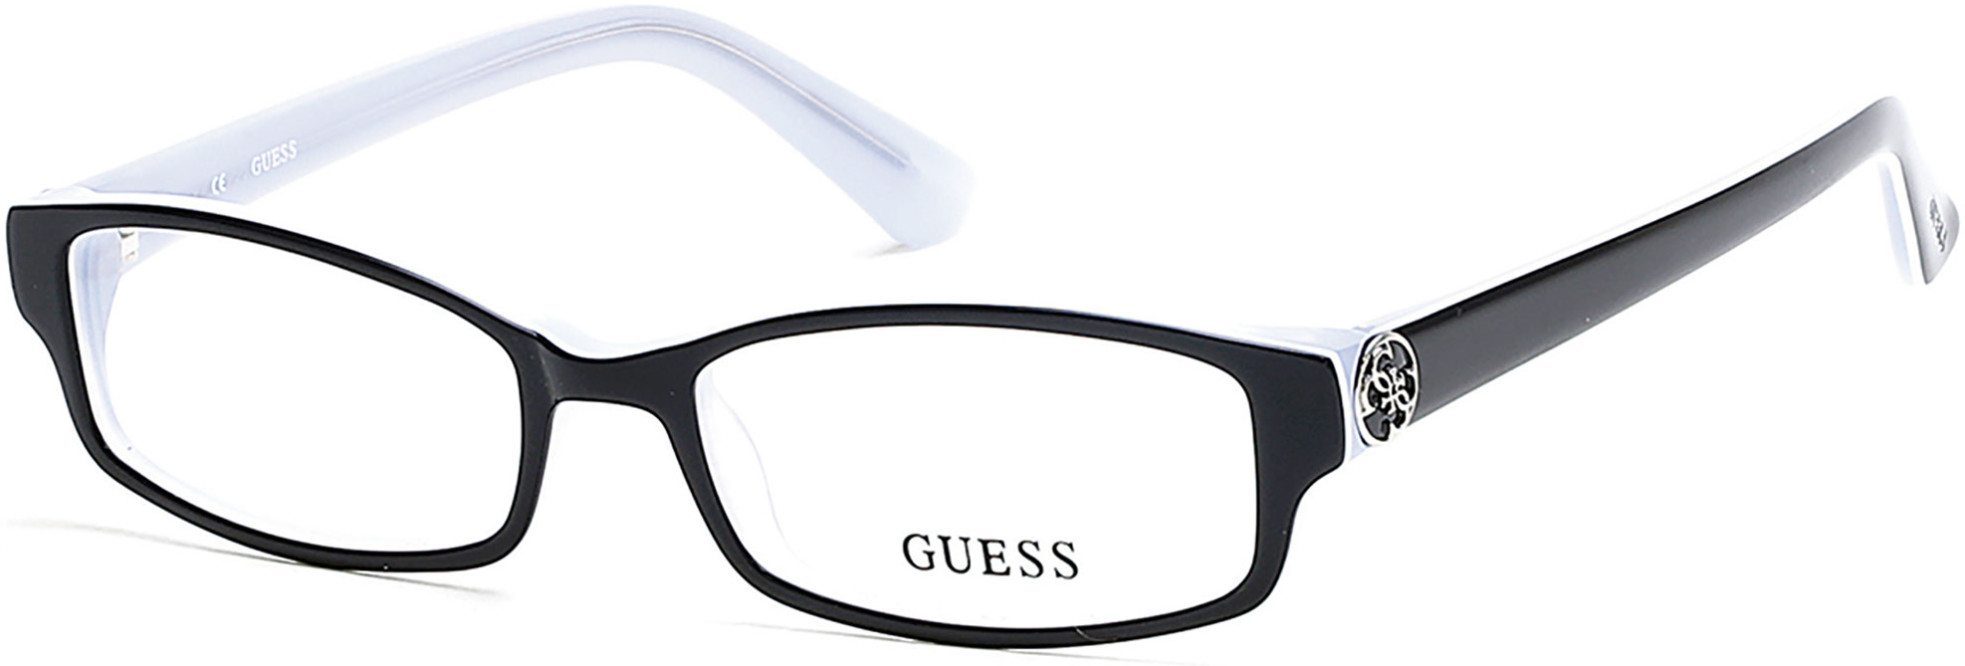 GUESS 2526 003